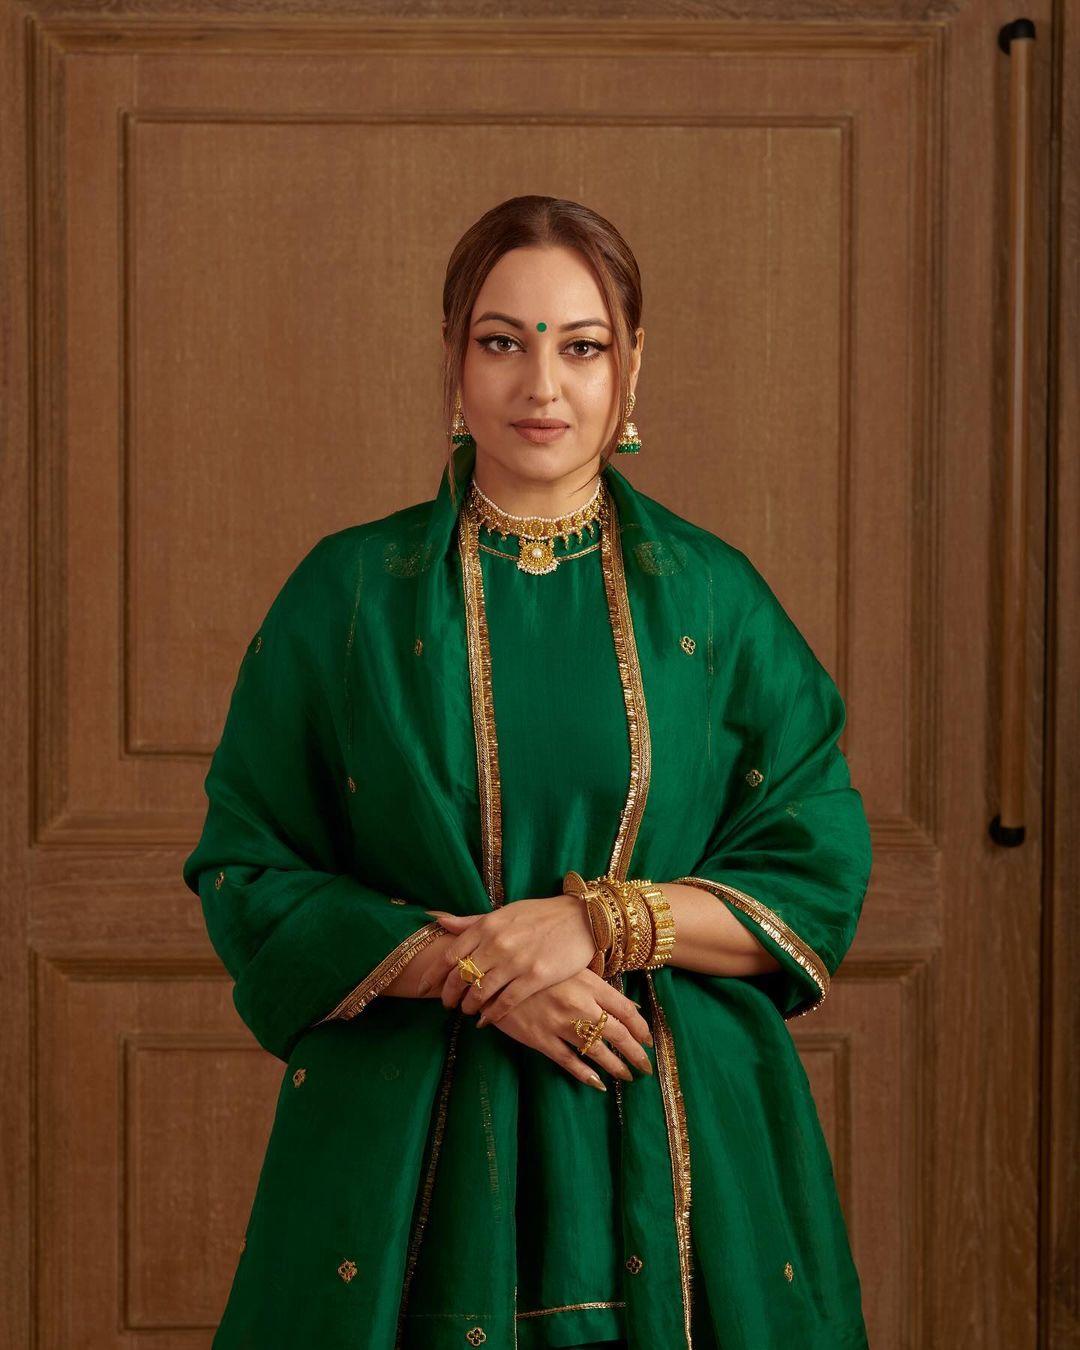 Sonakshi Sinha looked stunning in an all-green ensemble. The actress donned a short kurta paired with a matching skirt and complemented it with a dupatta featuring a contrasting golden border. She elegantly tied her hair in a chic bun, with two hair flicks framing her face and enhancing her overall look